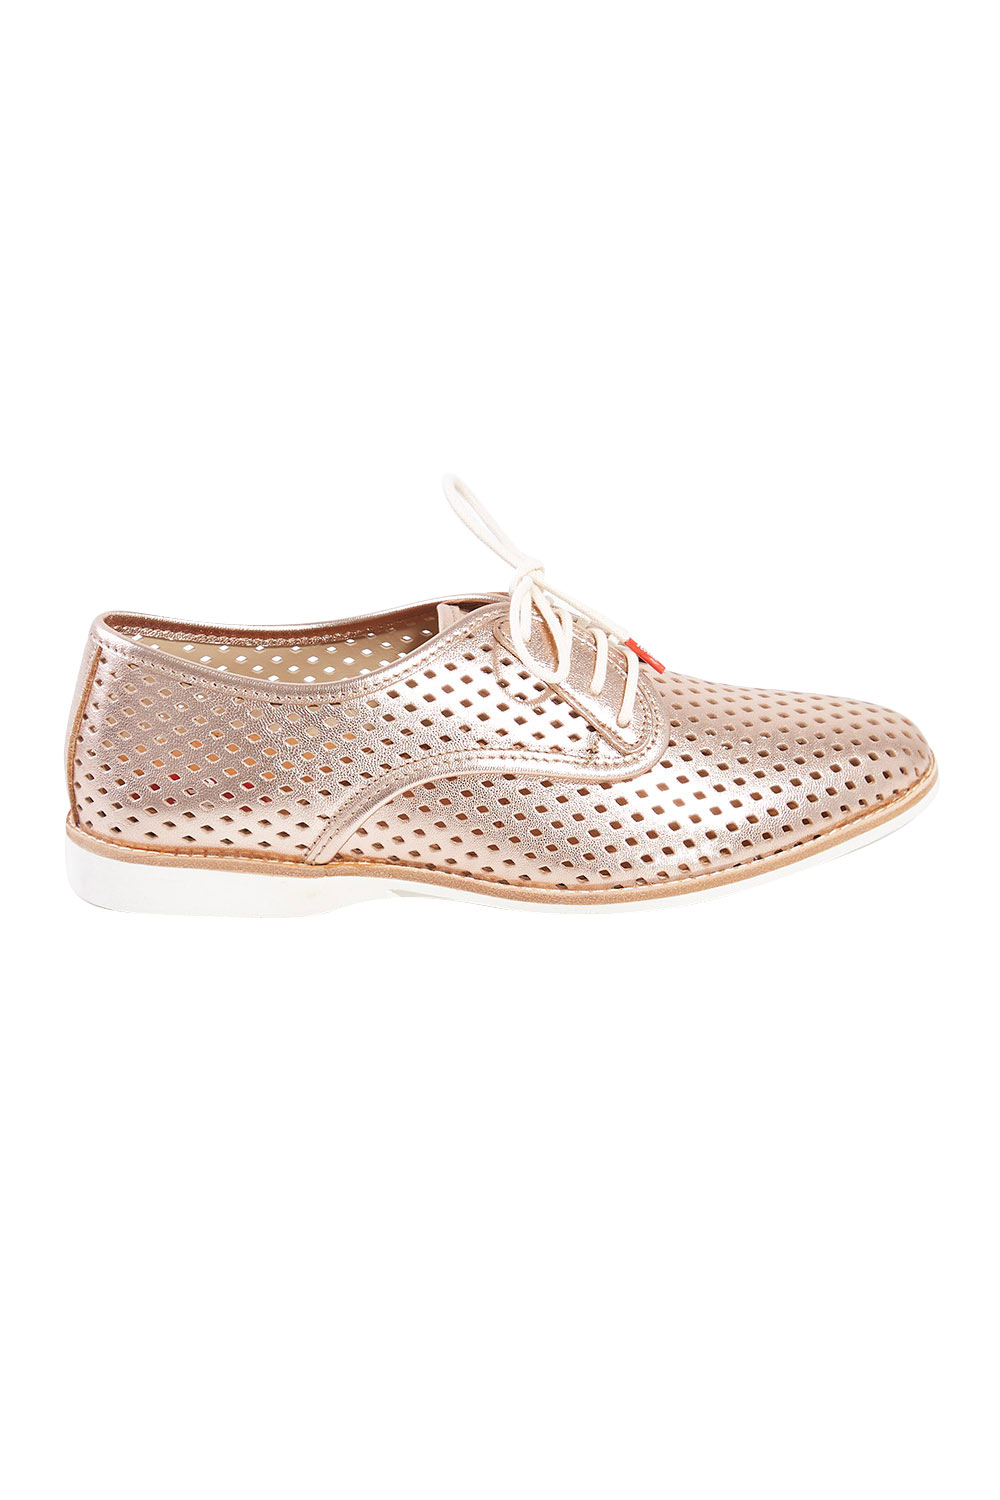 NEW Rollie Womens Flats Derby Punch 